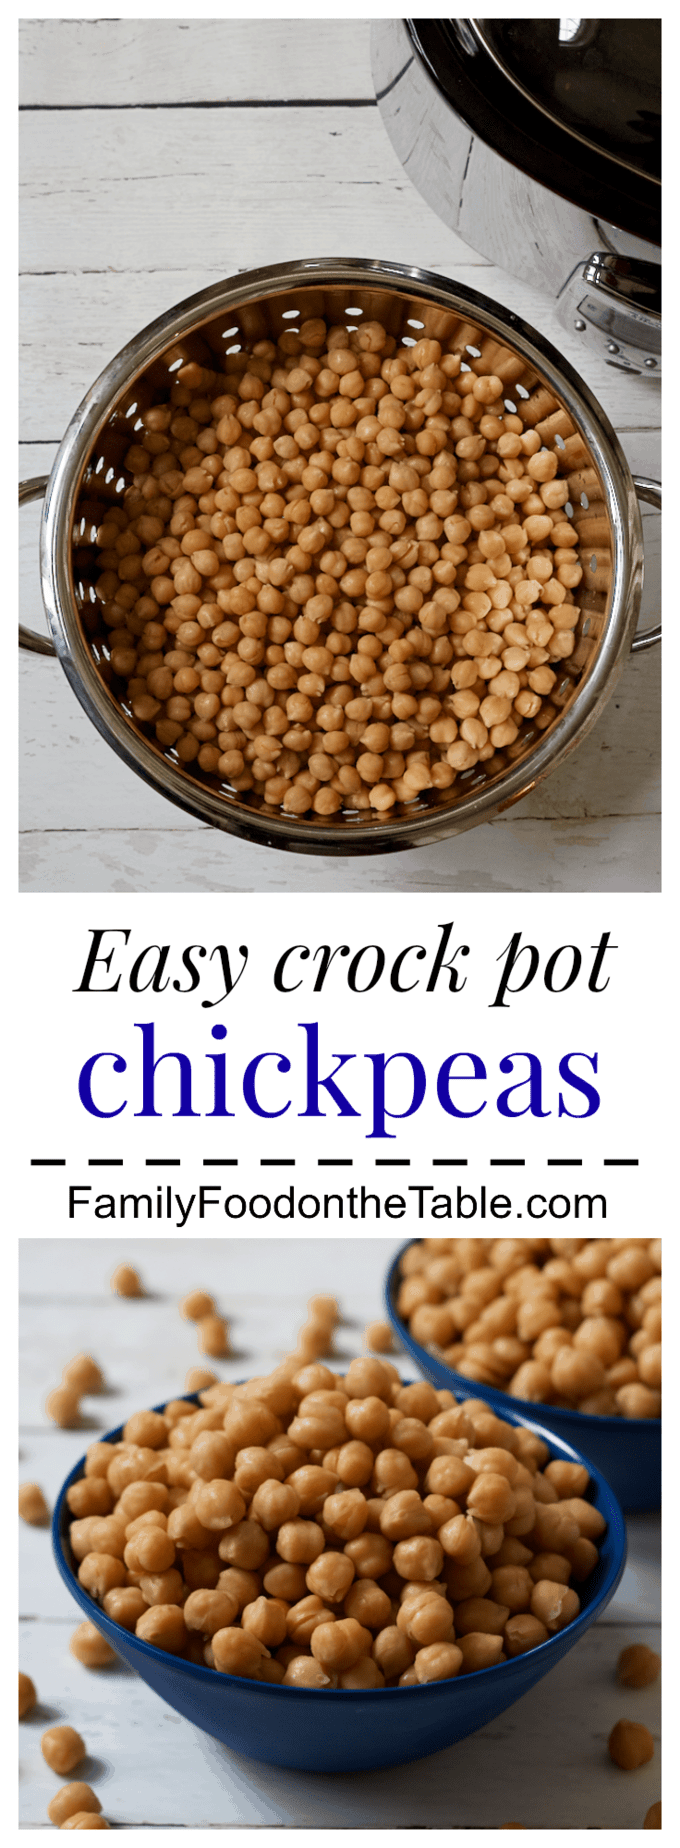 It’s so easy — and economical — to make your own chickpeas in the crock pot! | FamilyFoodontheTable.com